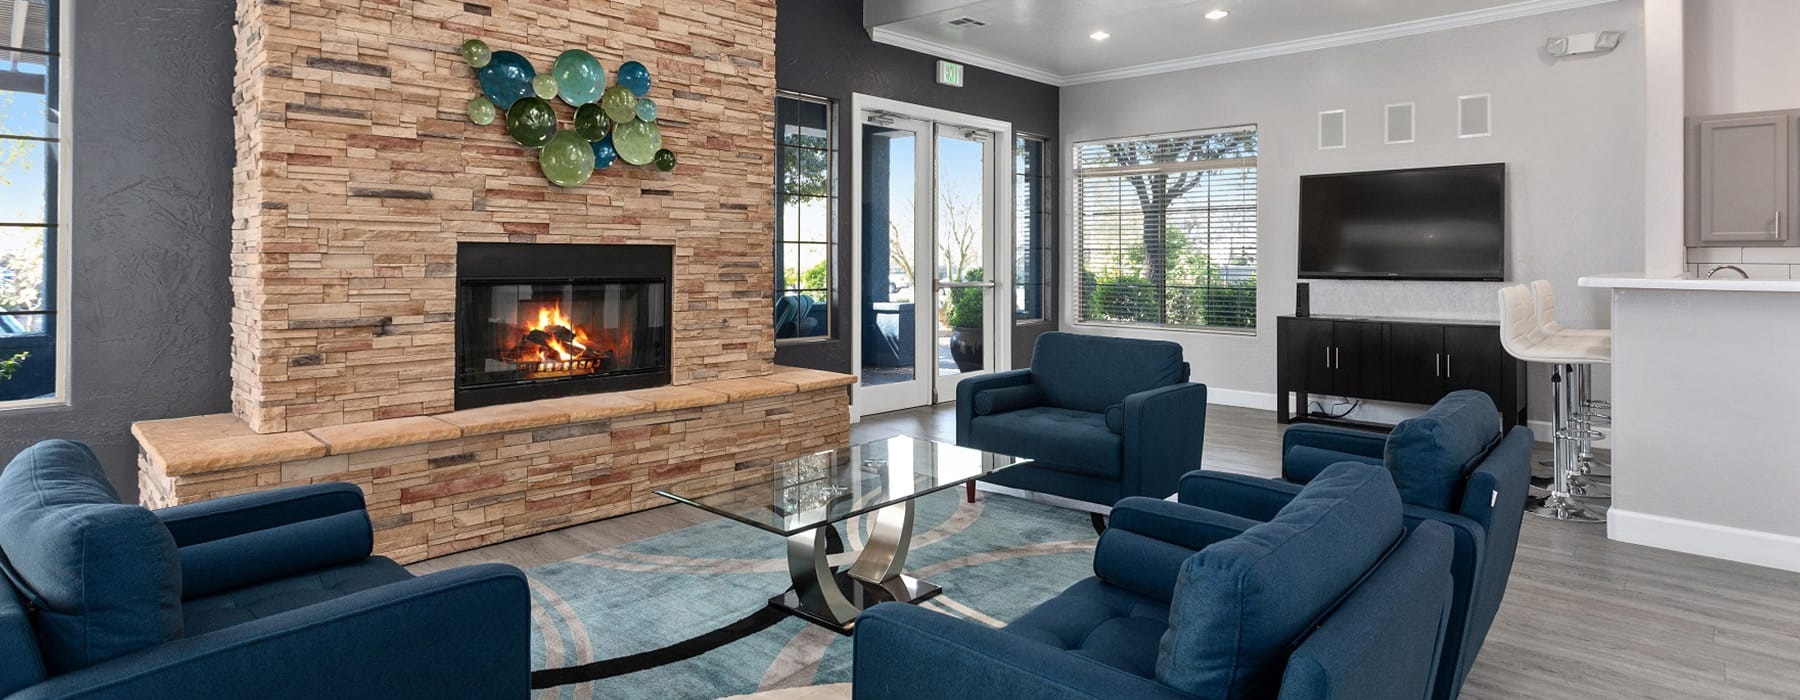 lounge area with seating and a fireplace